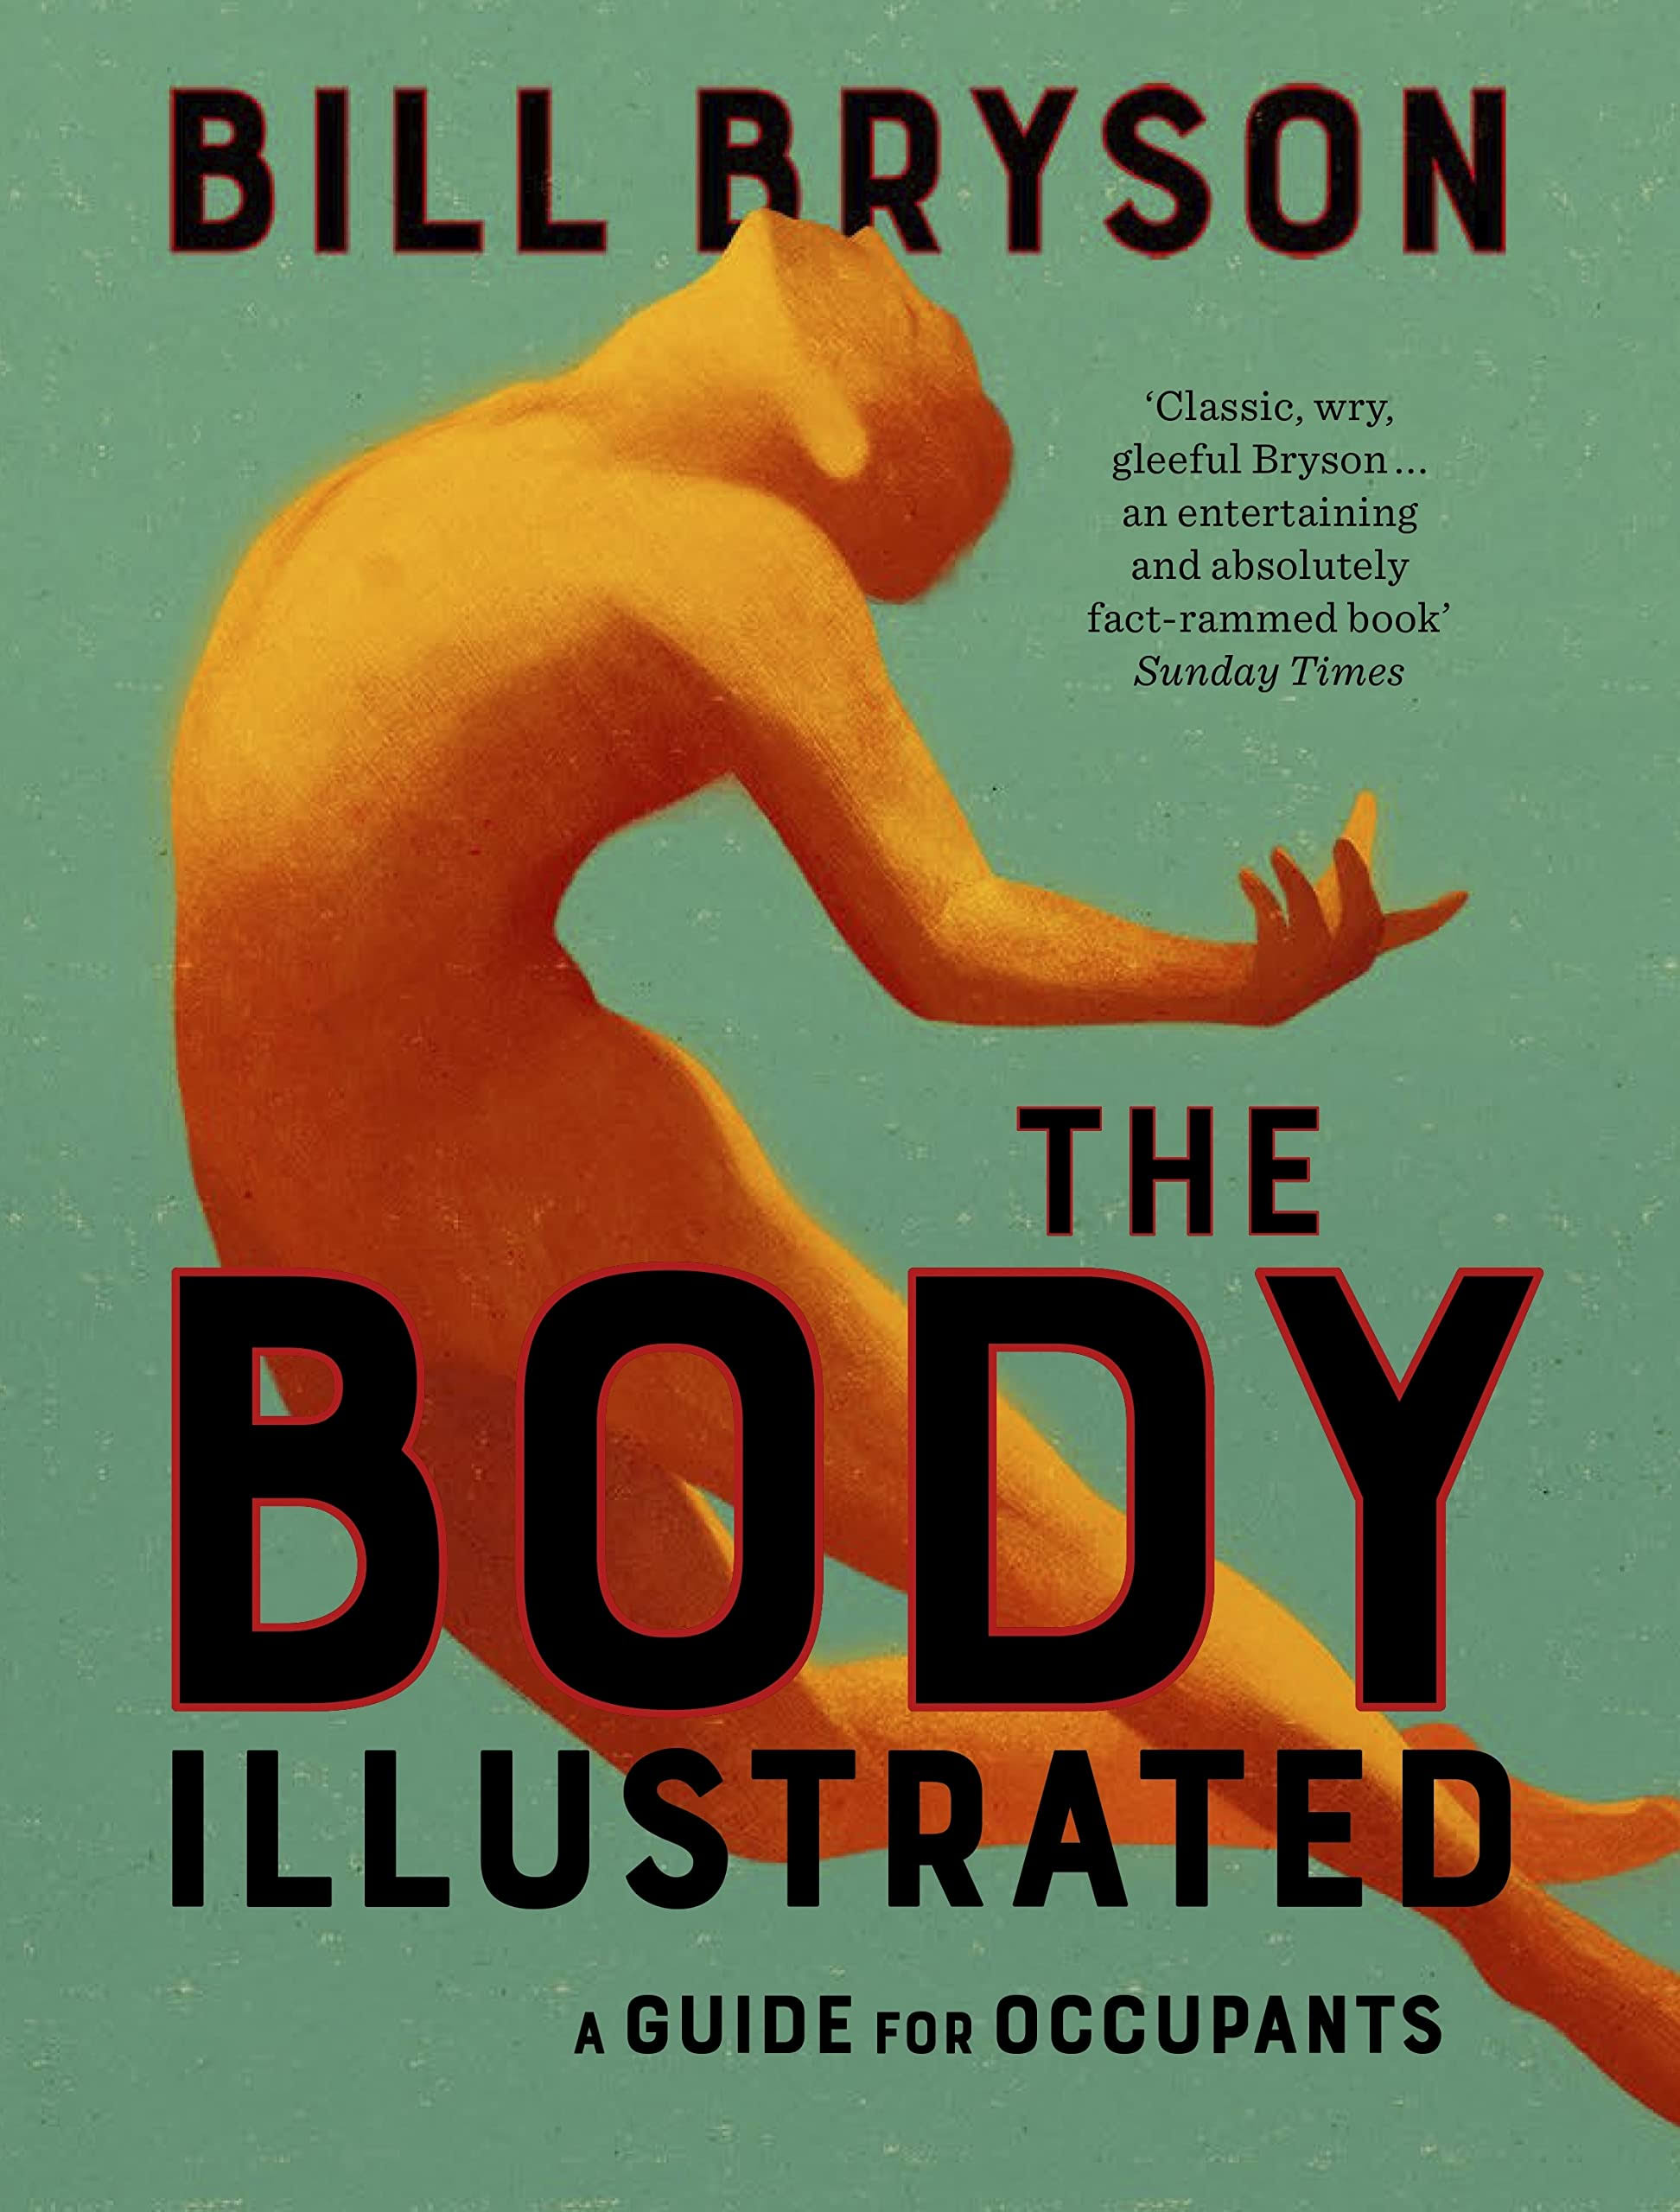 The Body - Illustrated by Bill Bryson